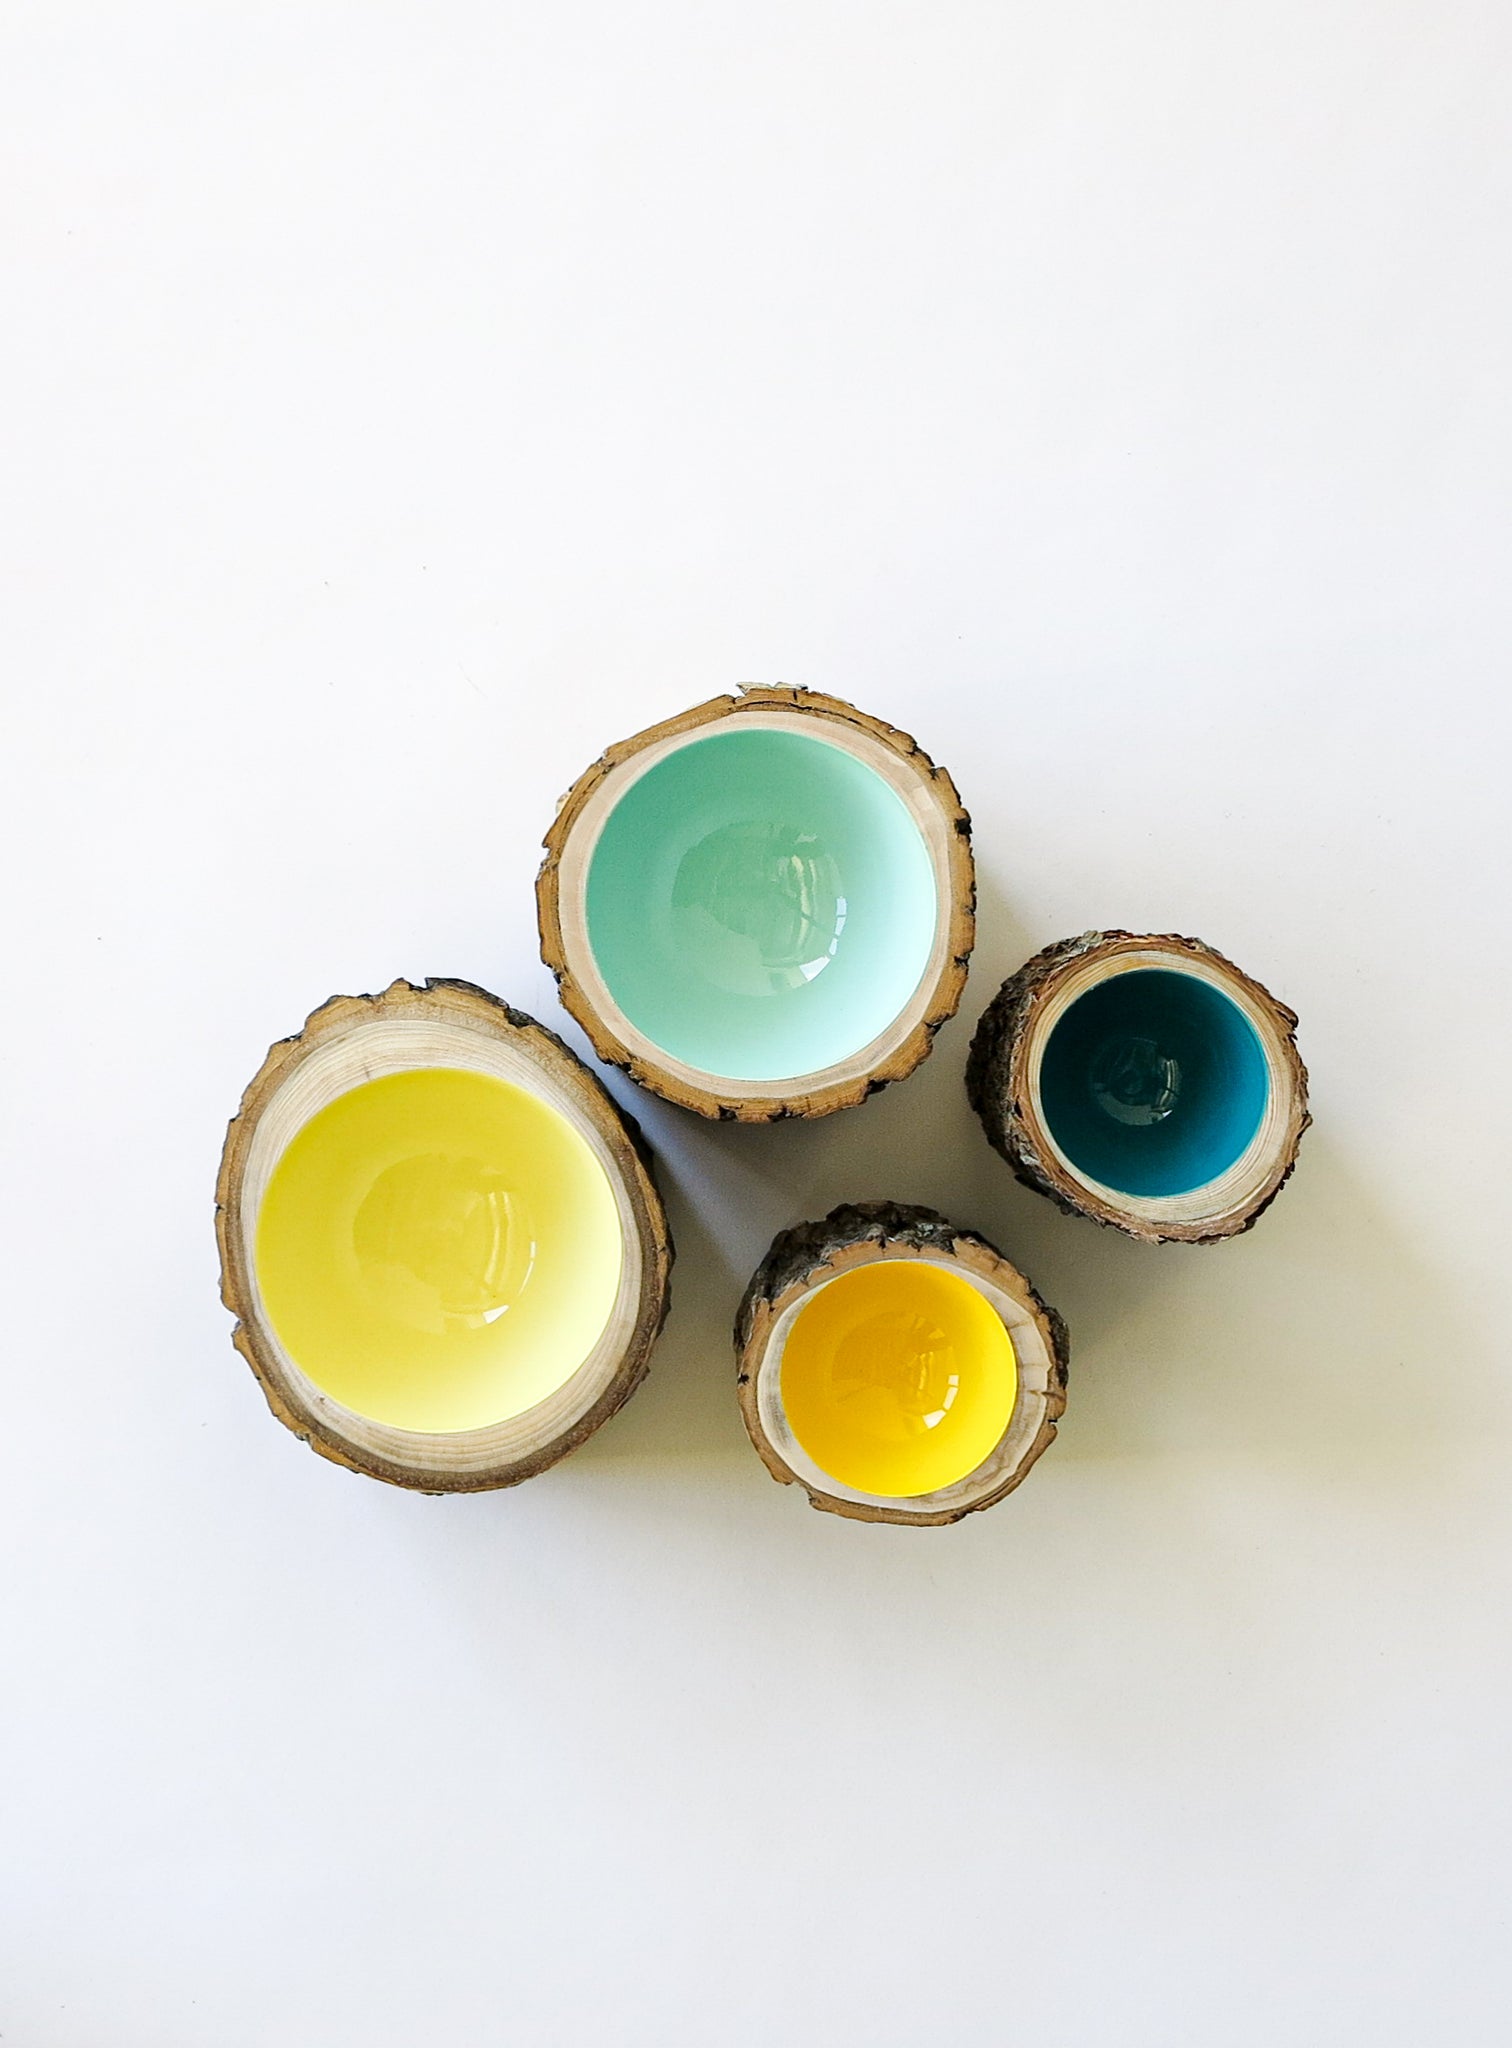 Top view of four wood Log Bowls by Loyal Loot. Glossy interiors are aqua, lemon, butter yellow and turquoise in colour.